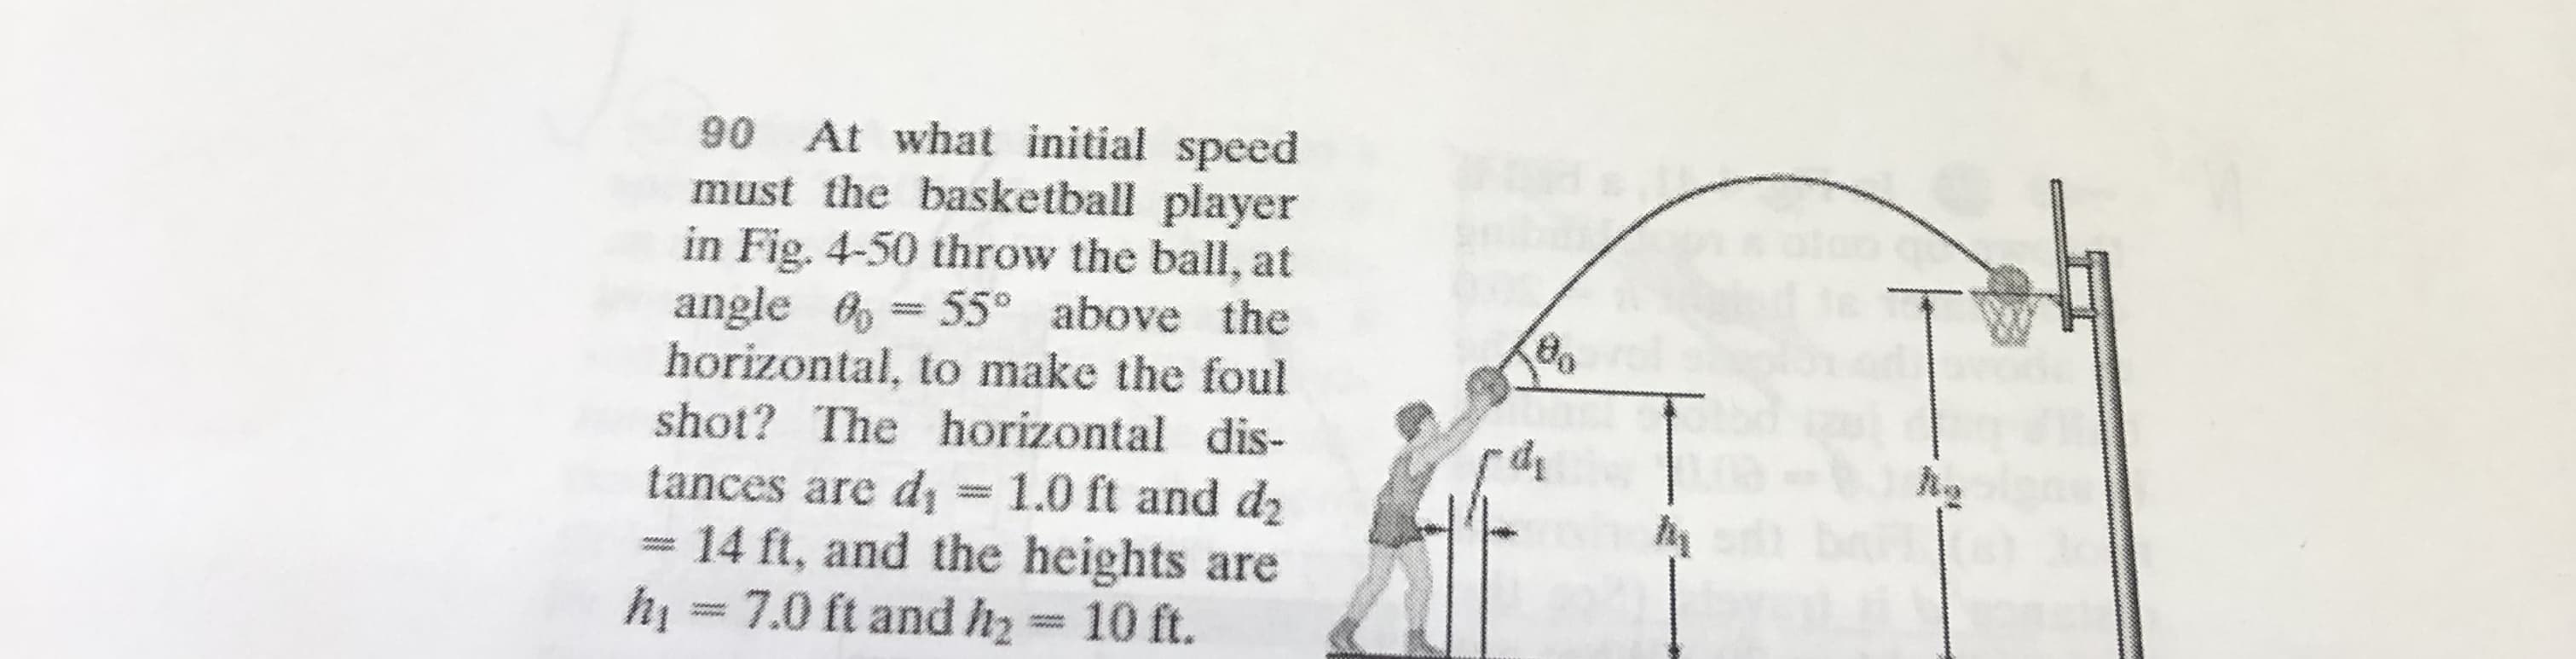 90 At what initial speed
must the basketball player
in Fig. 4-50 throw the ball, at
angle 6 = 55° above the
horizontal, to make the foul
shot? The horizontal dis-
tances are di=1.0 ft and d2
14 ft, and the heights are
hi = 7.0 ft and hz = 10 ft.
moooe
2000000
